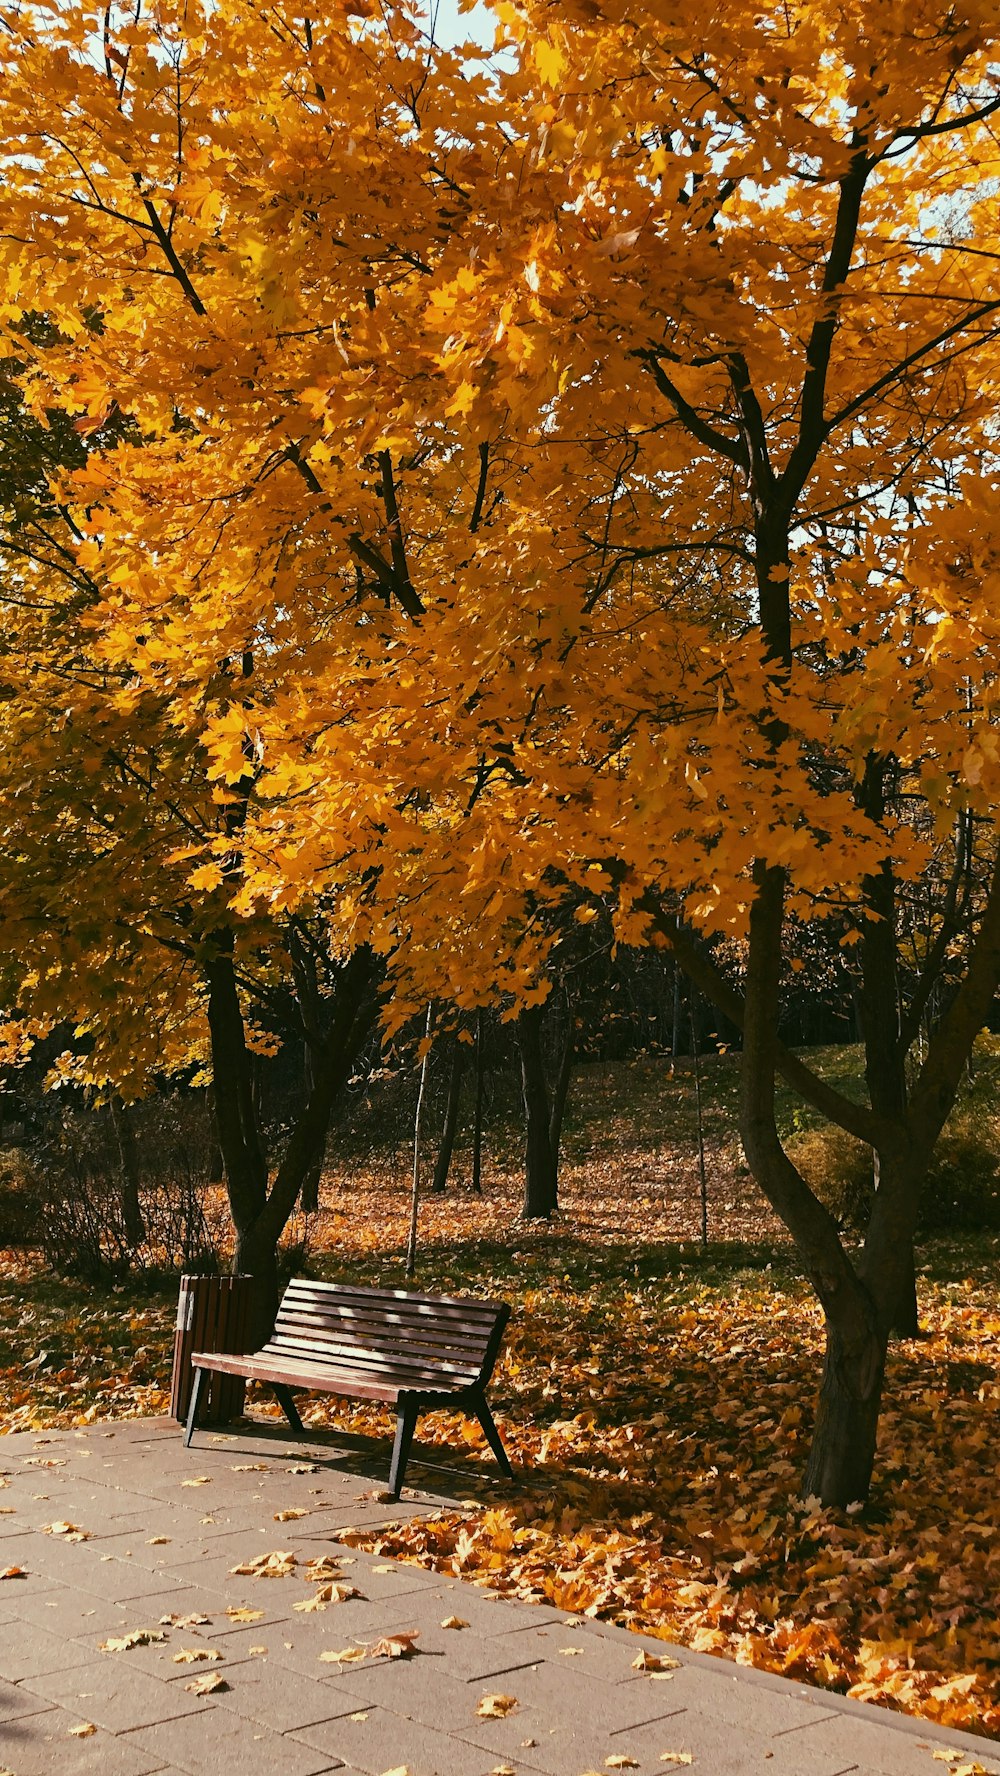 a wooden bench sitting under a tree filled with yellow leaves